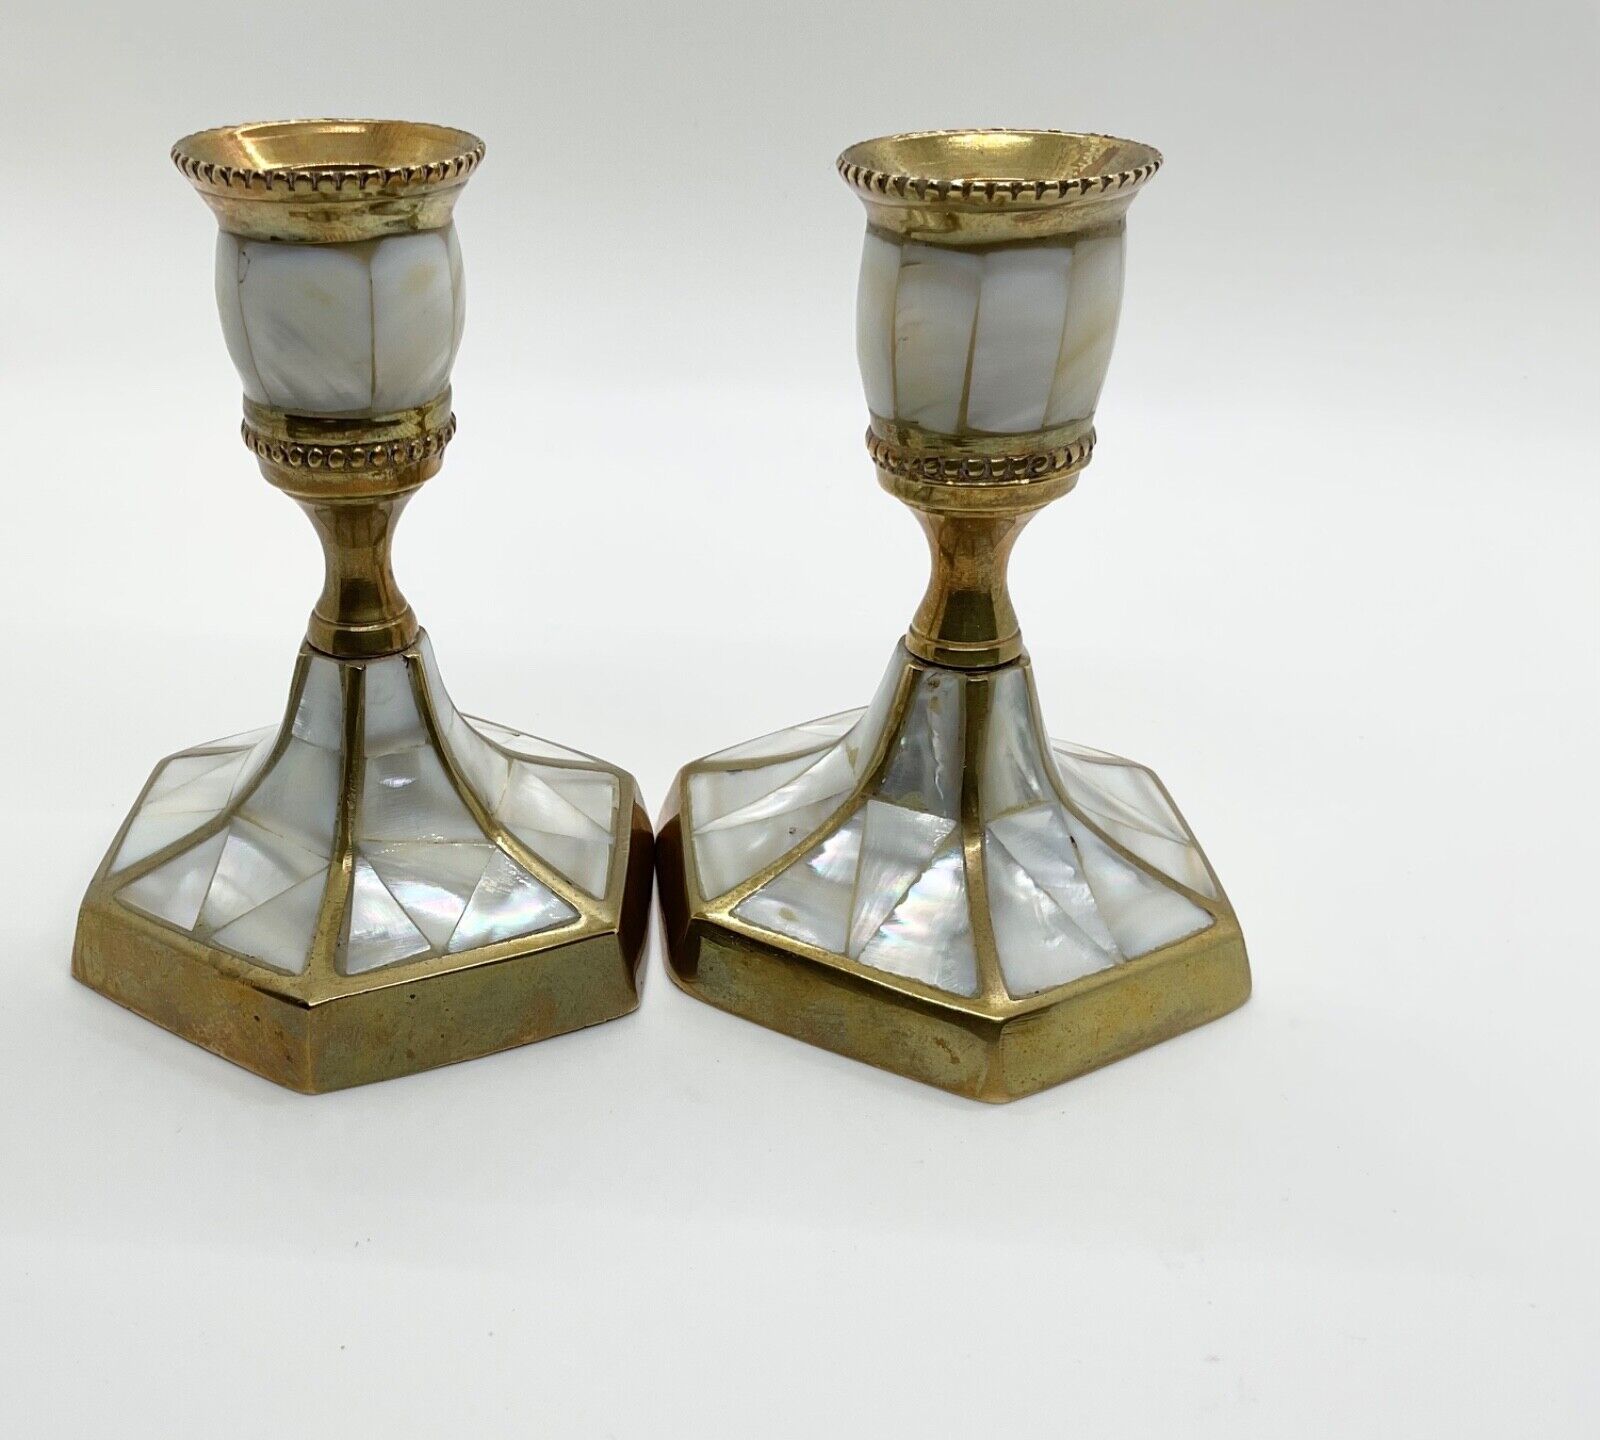 Vintage Pair Of Brass And Inlaid Mother Of Pearl Candlesticks